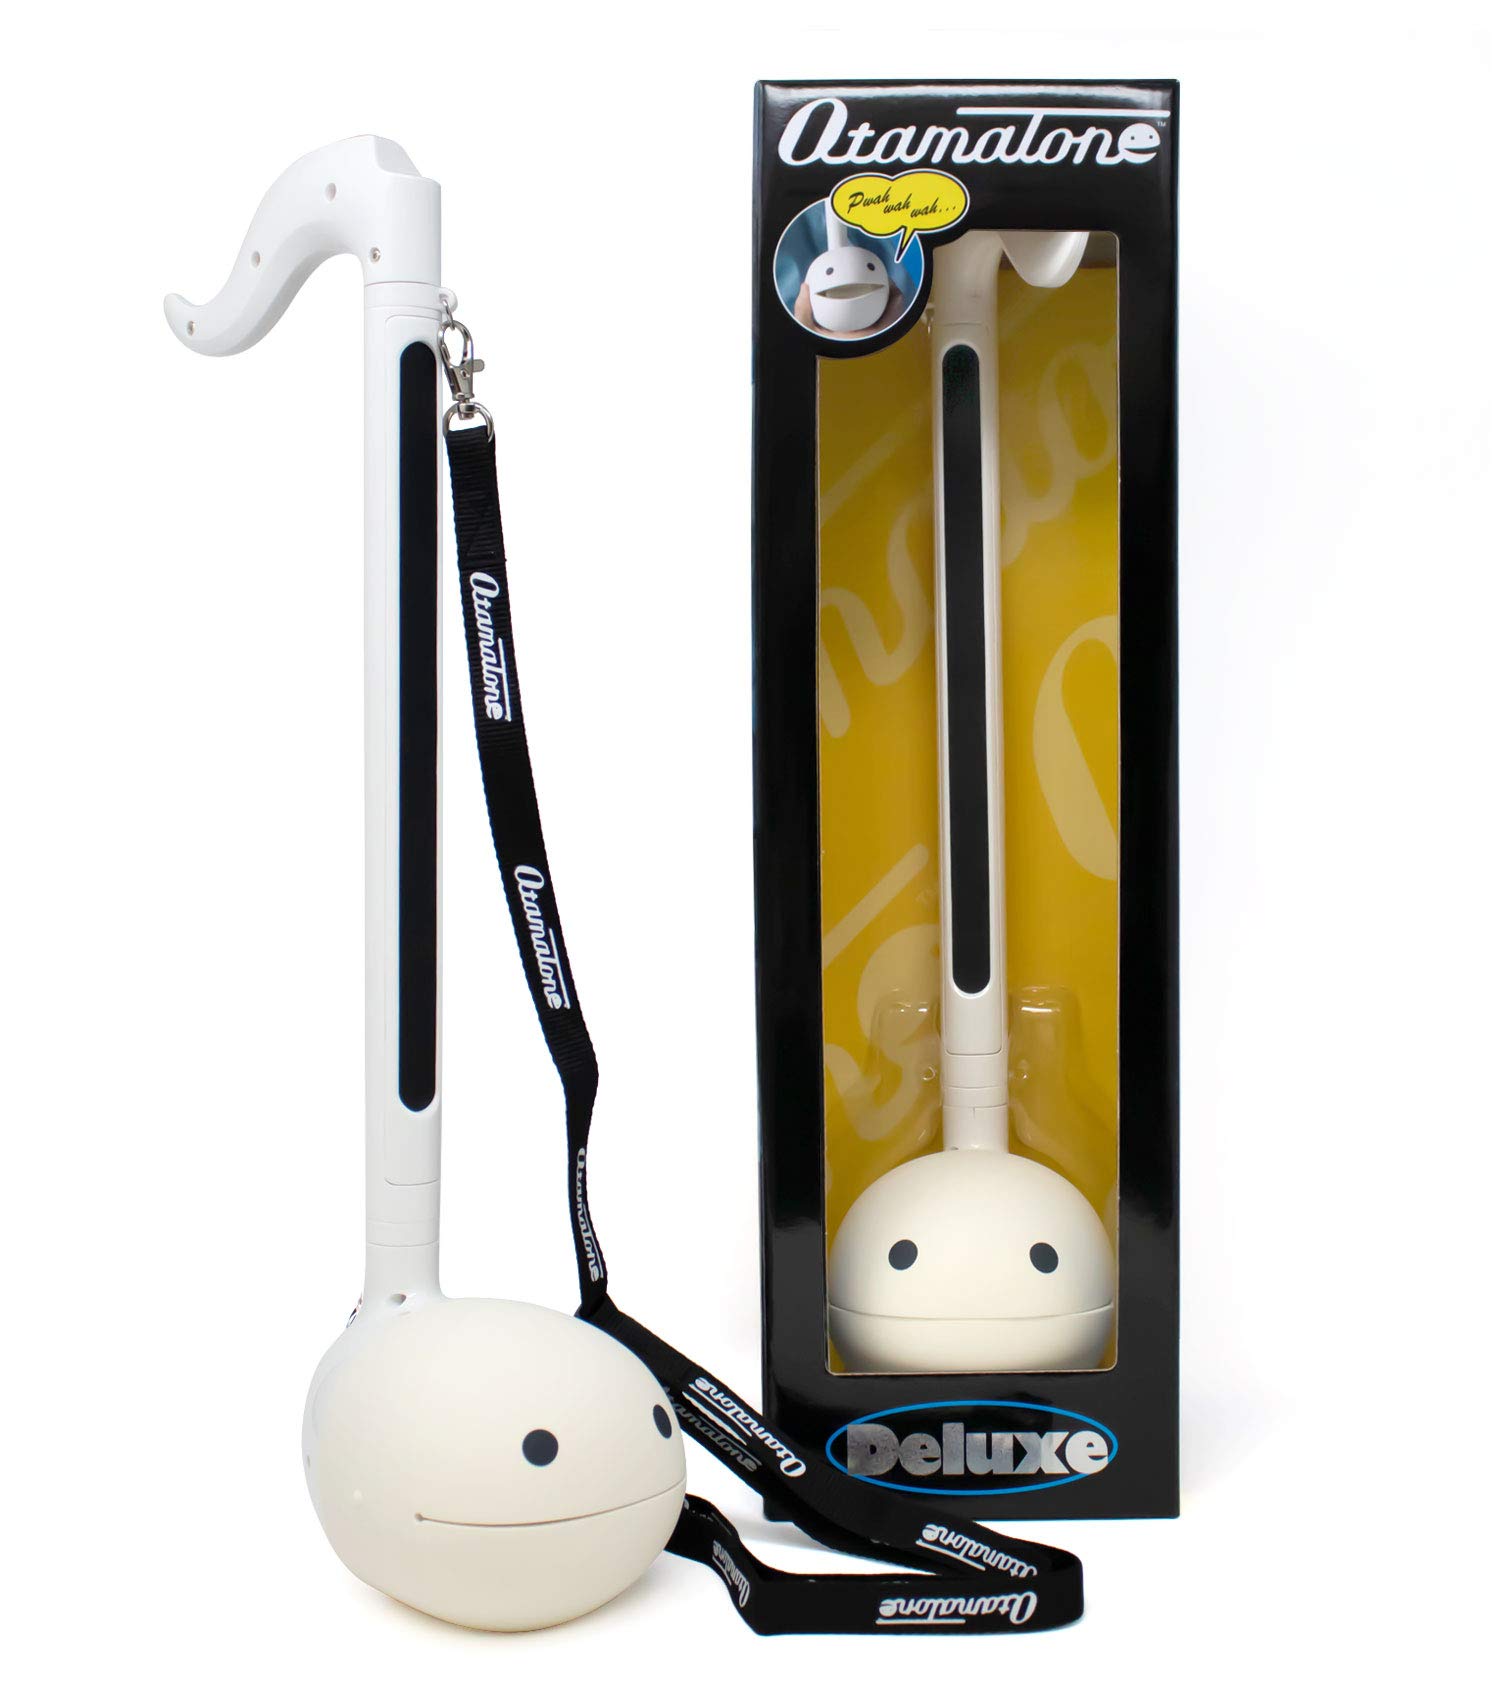 F/S from Japan Black New Cube Otamatone Deluxe 